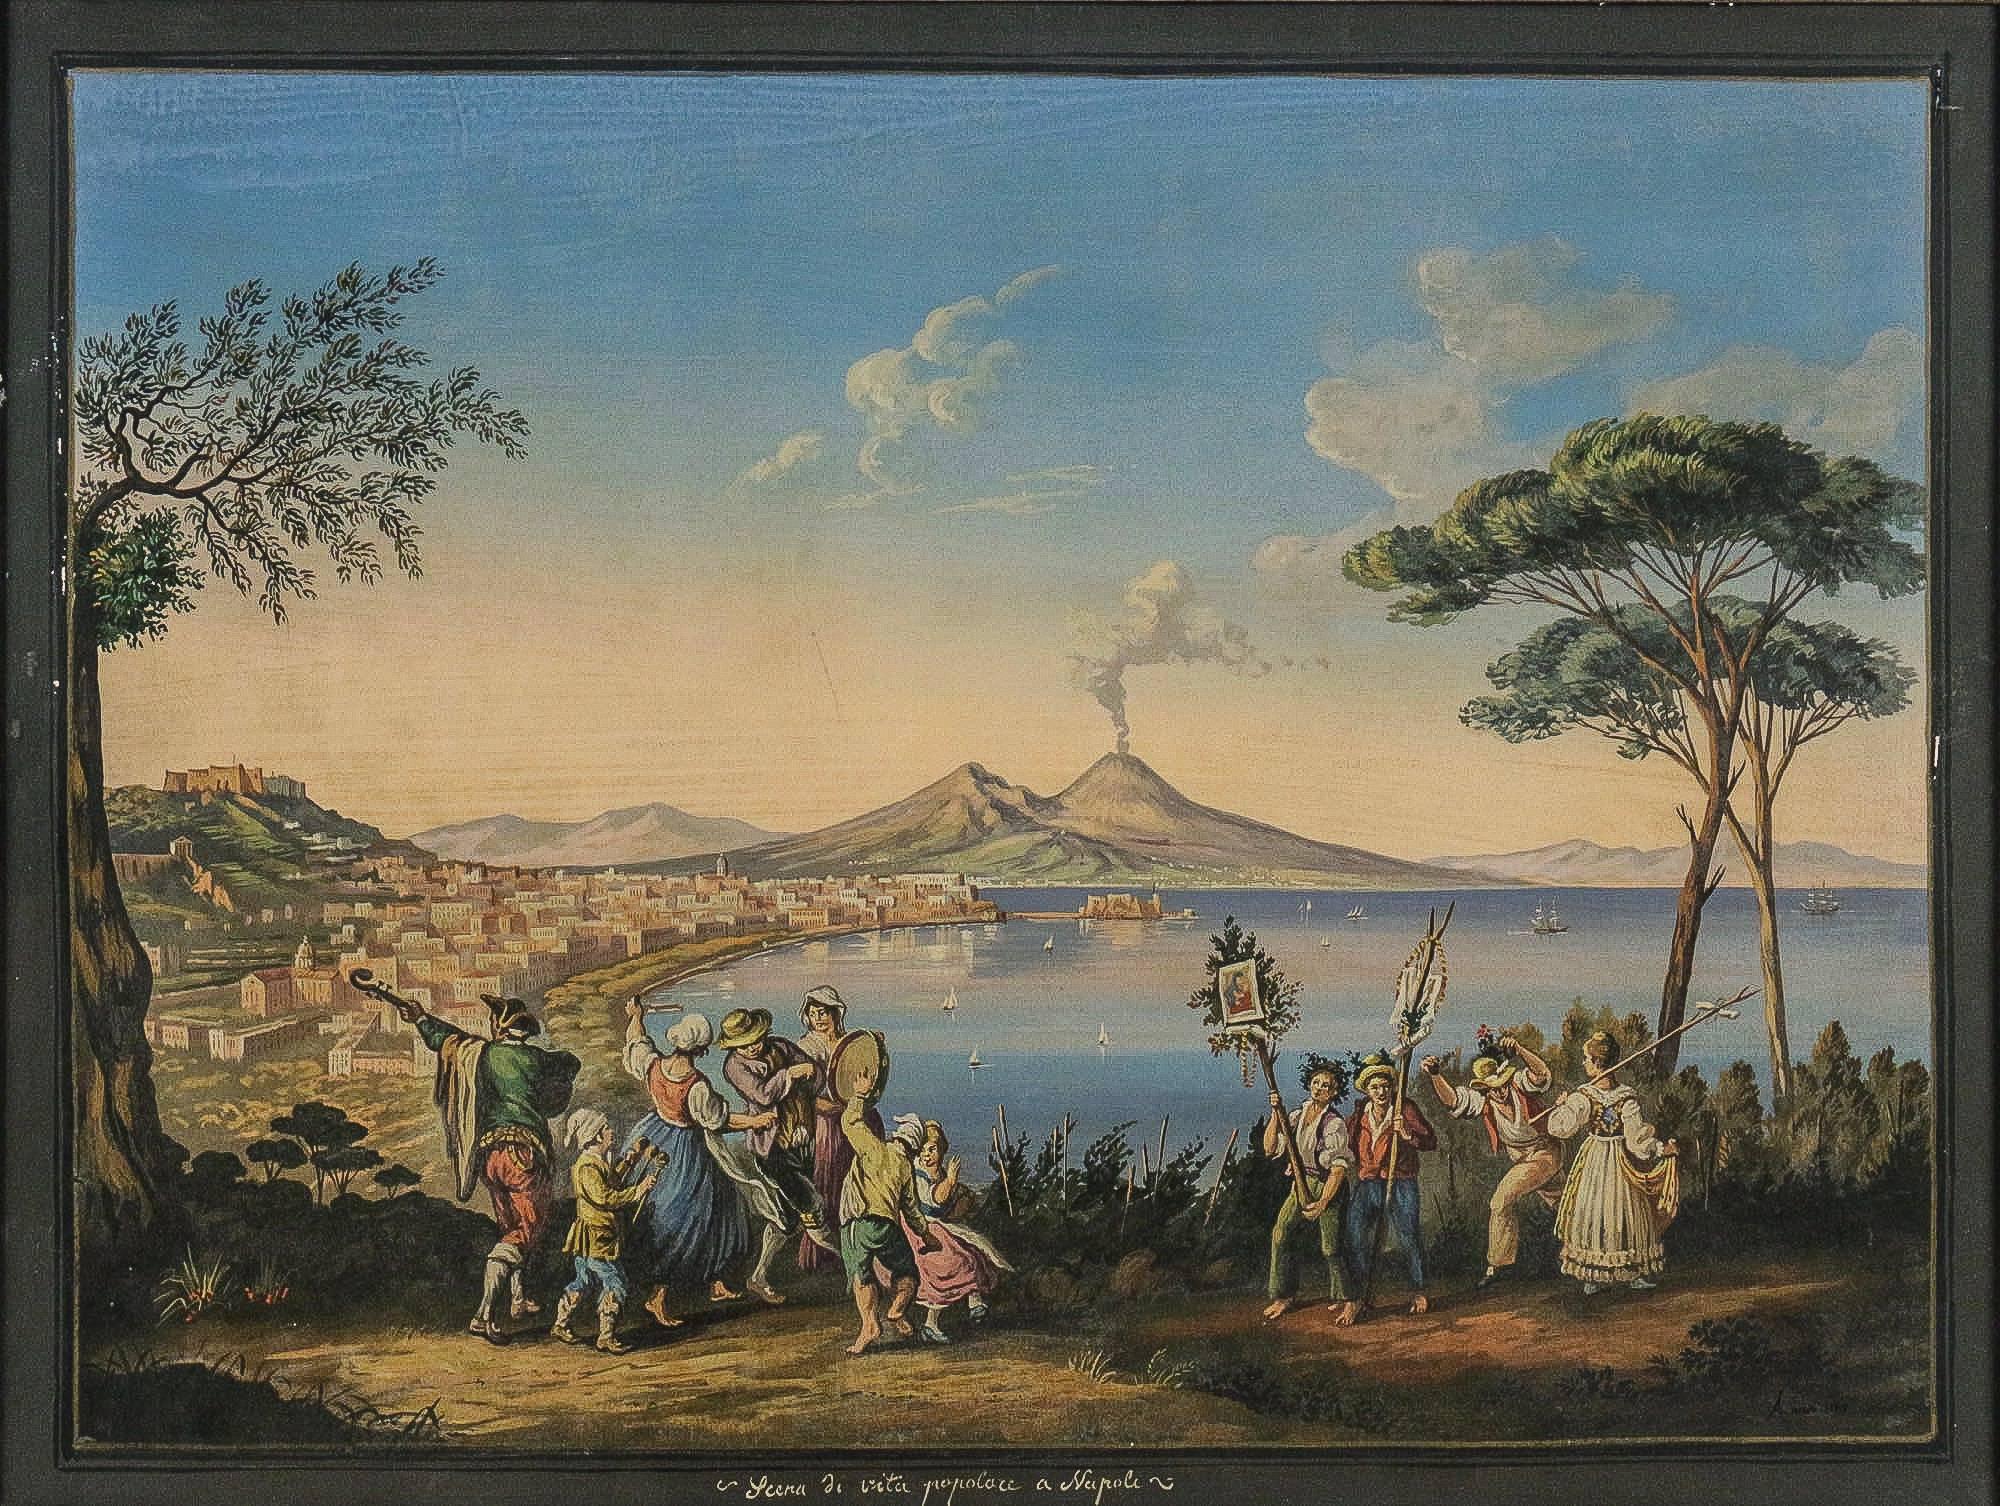 bay of naples painting meaning